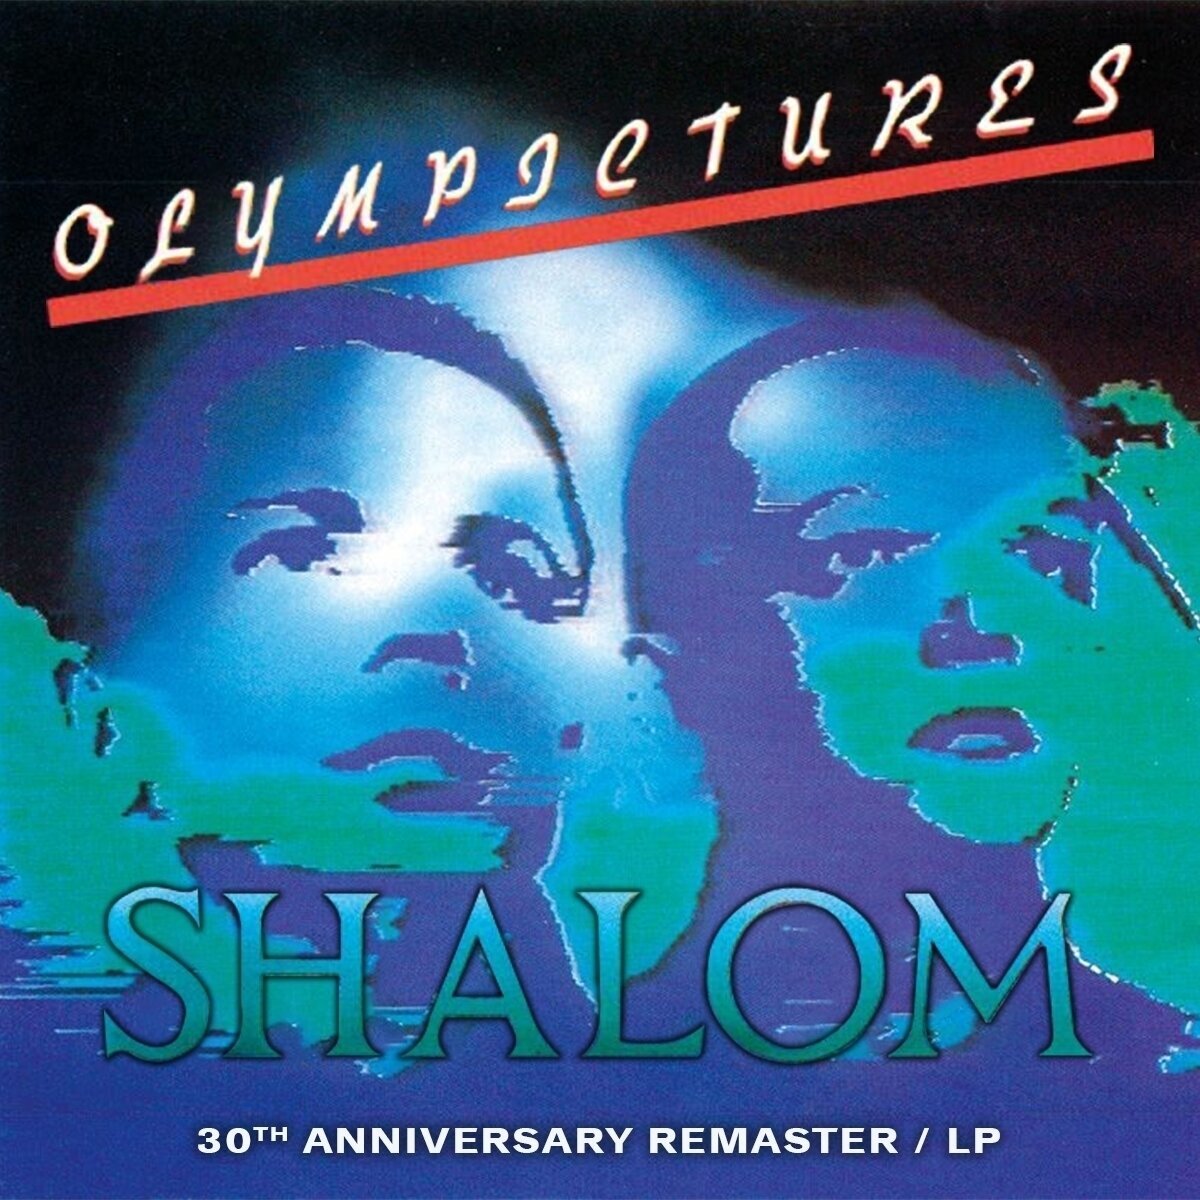 Glasbene CD Shalom - Olympictures (30th Anniversary) (Remastered) (CD)